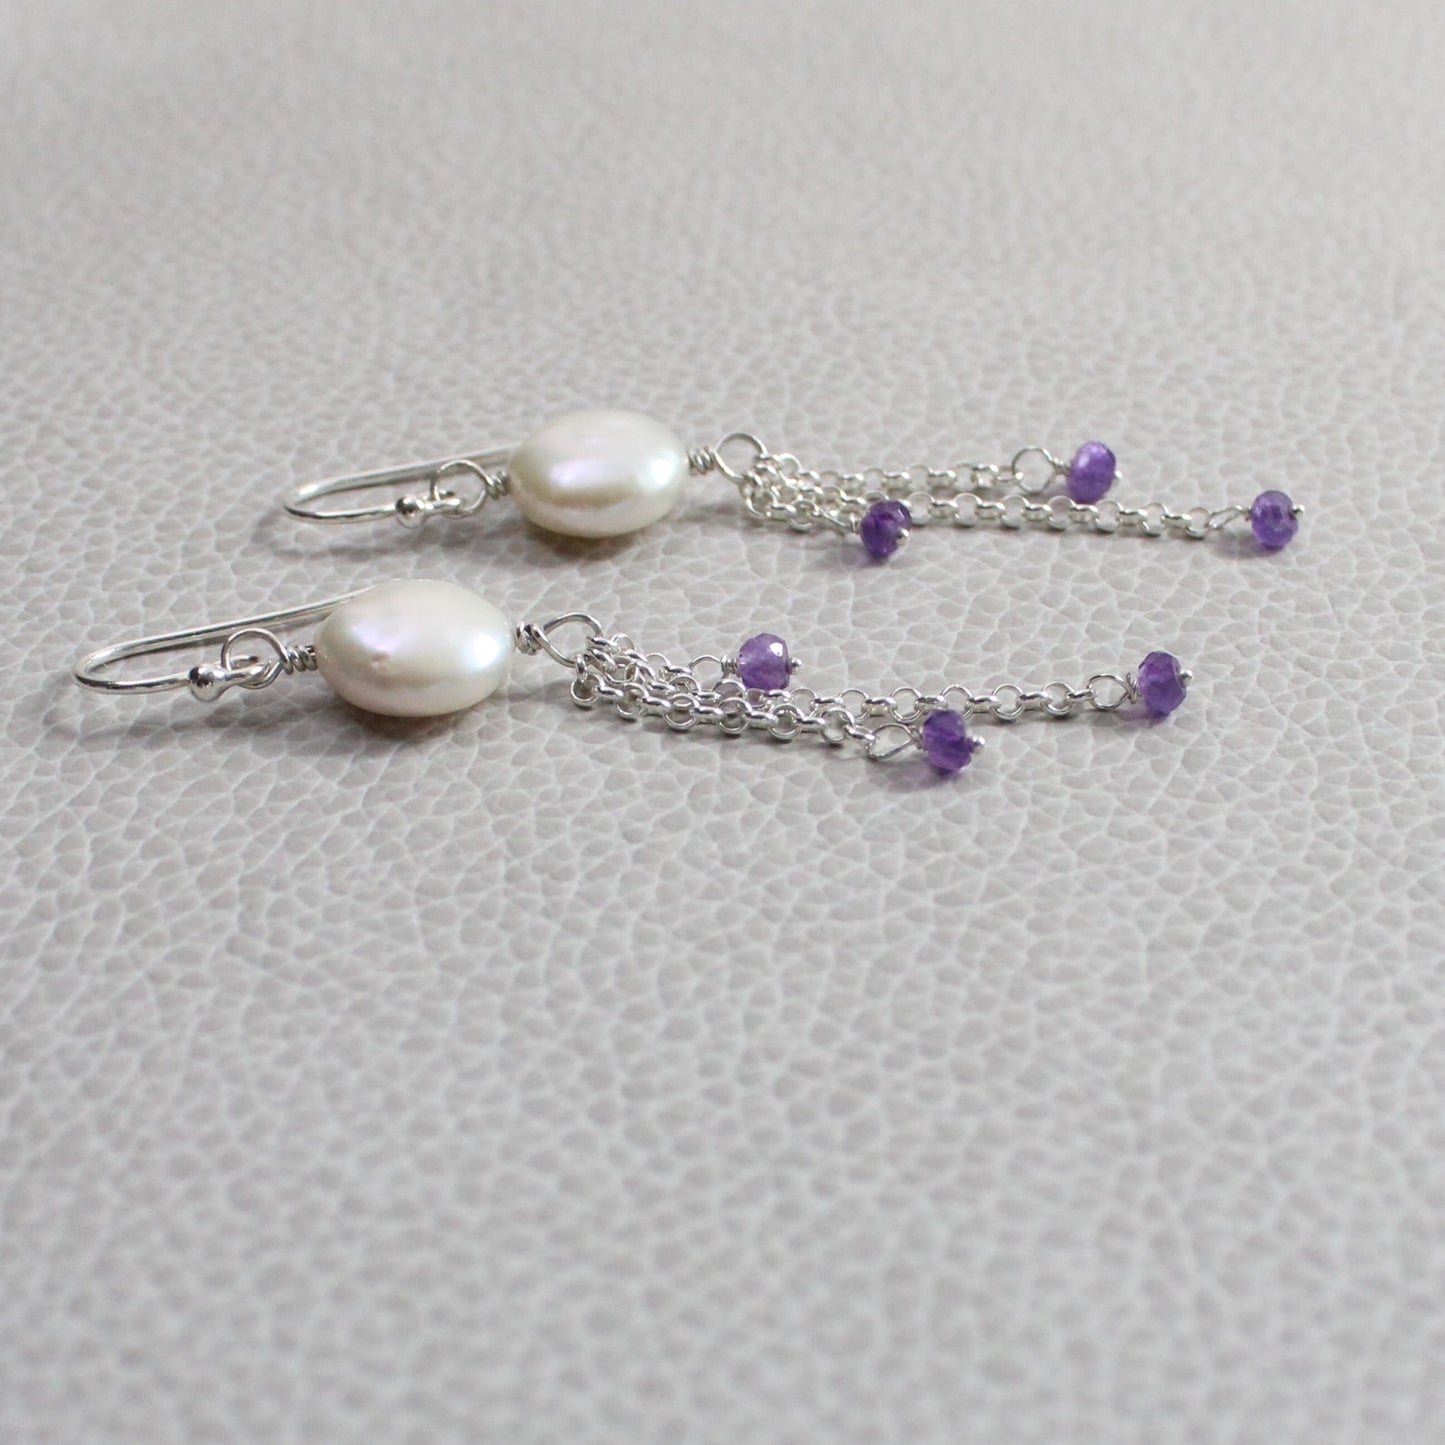 Freshwater Coin Pearl and Amethyst Dangle Earrings - Taylor